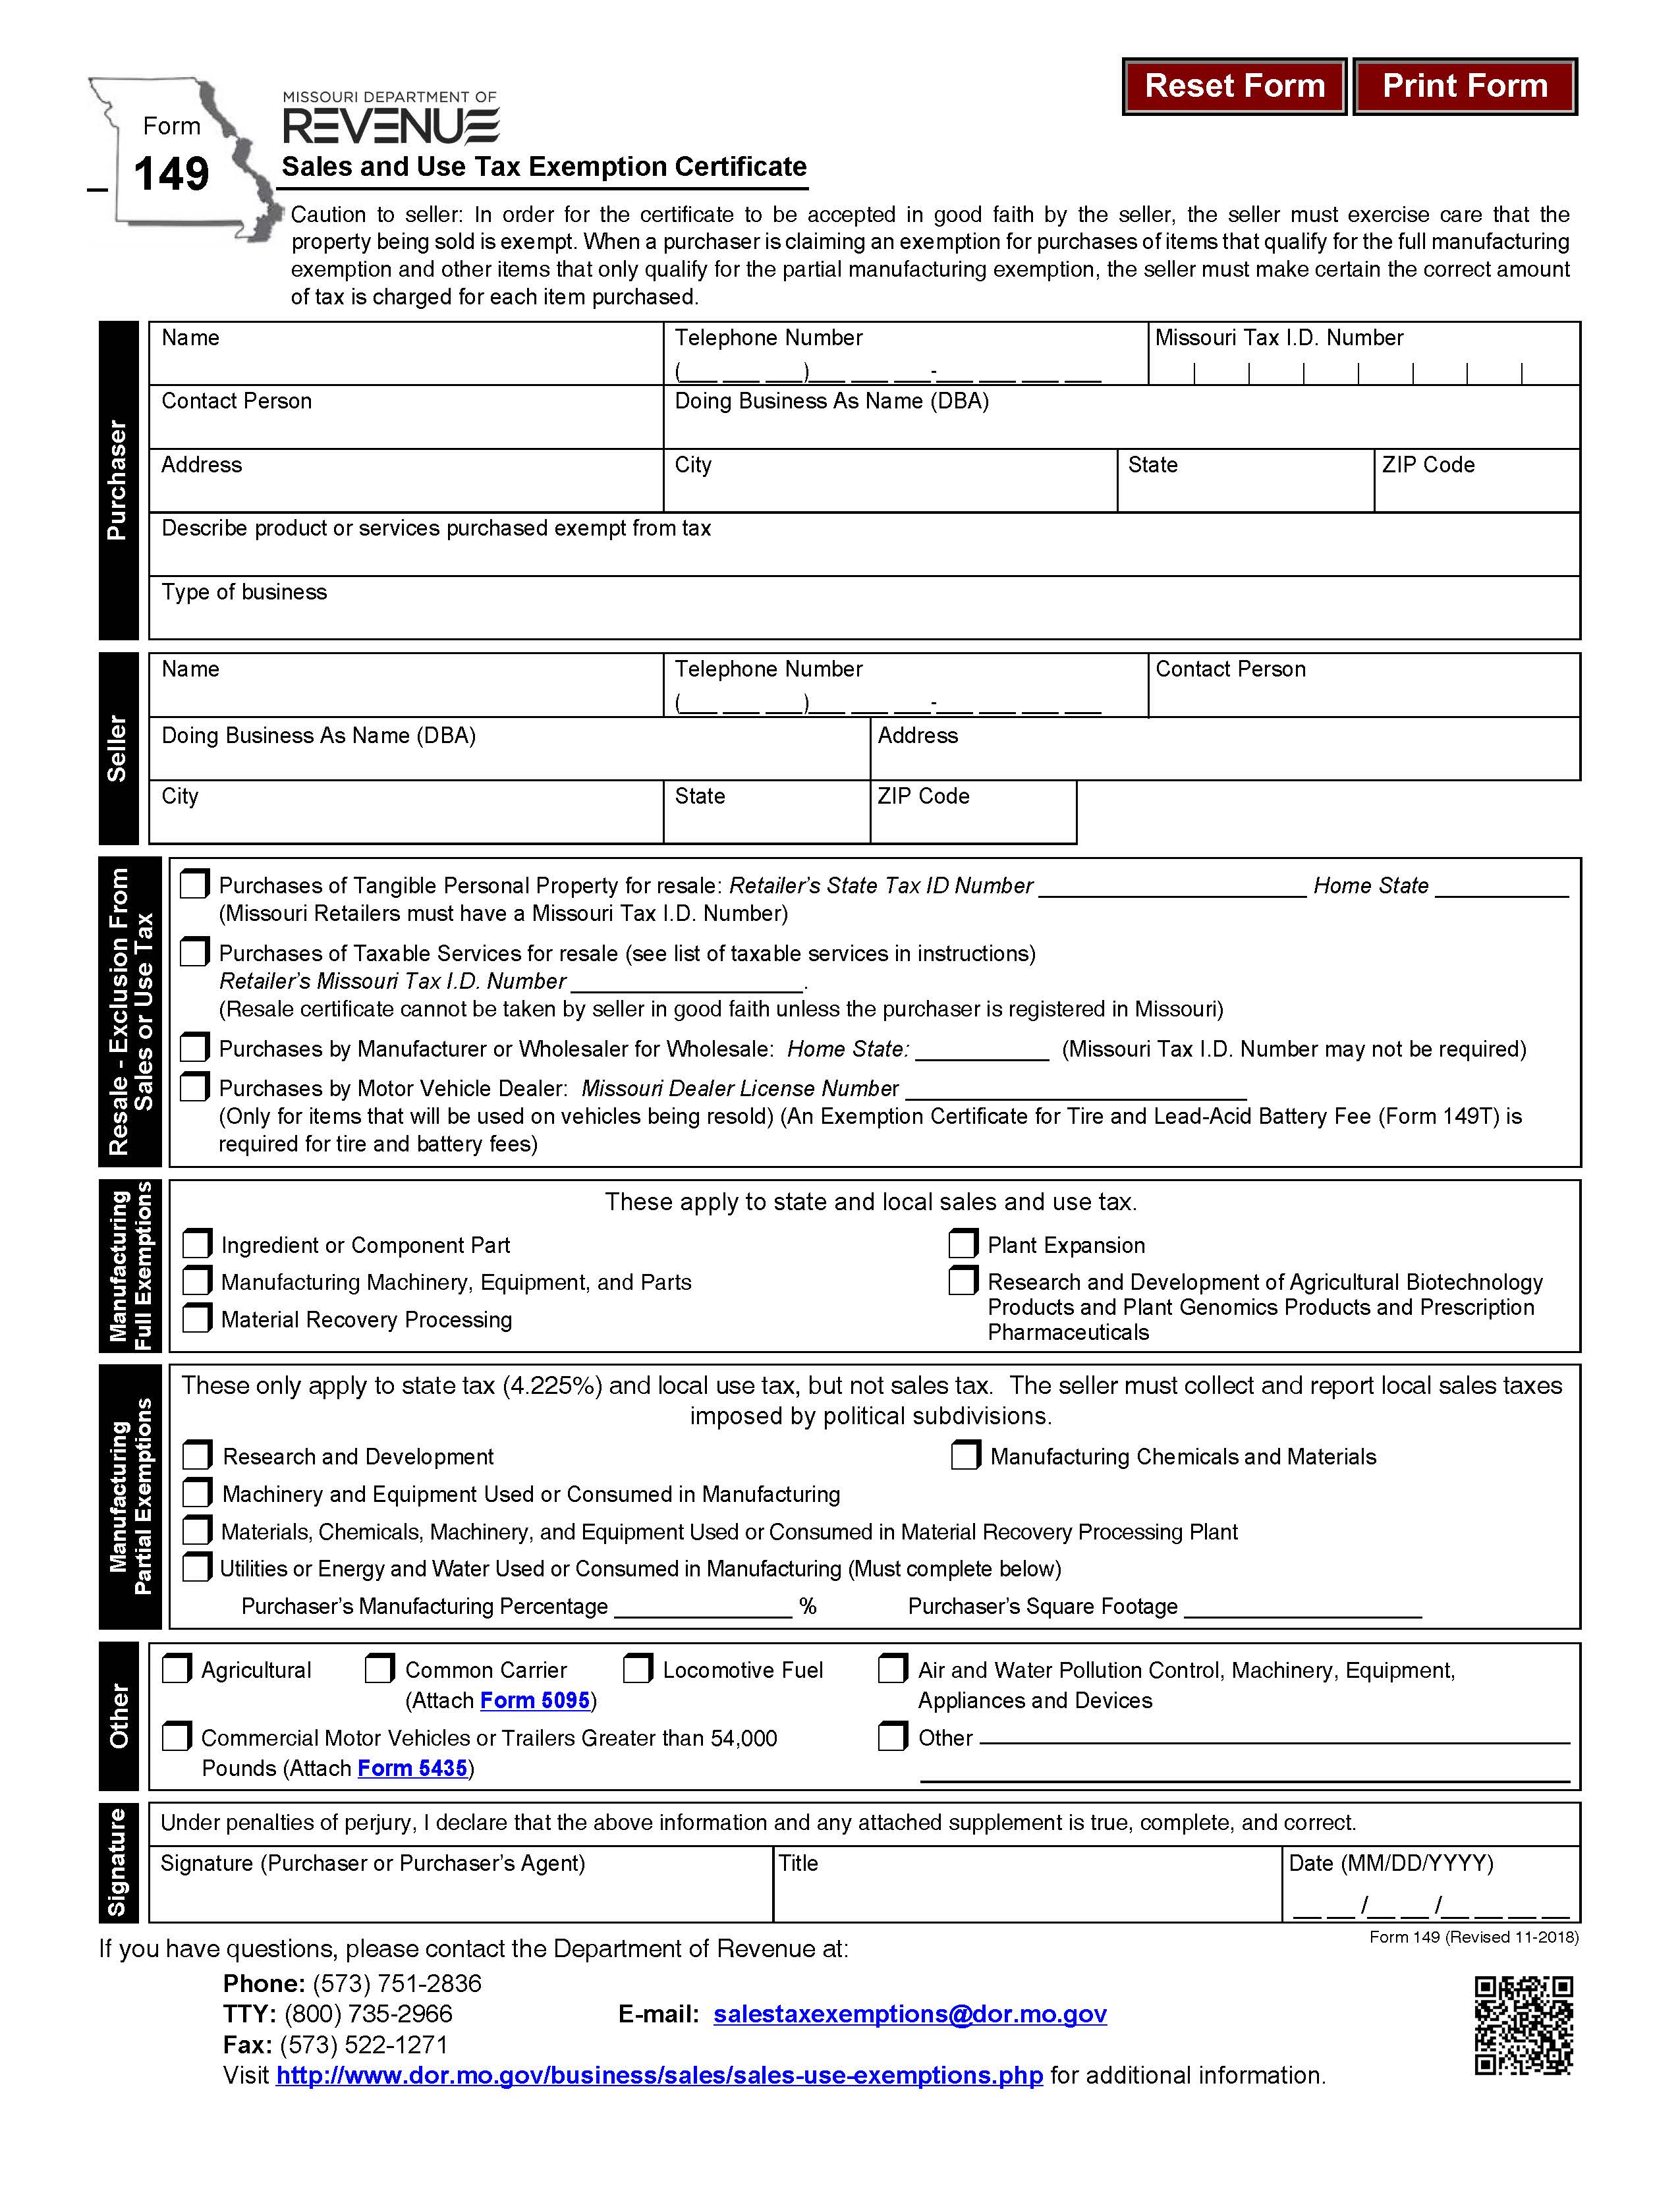 mo-149-sales-taxpage1